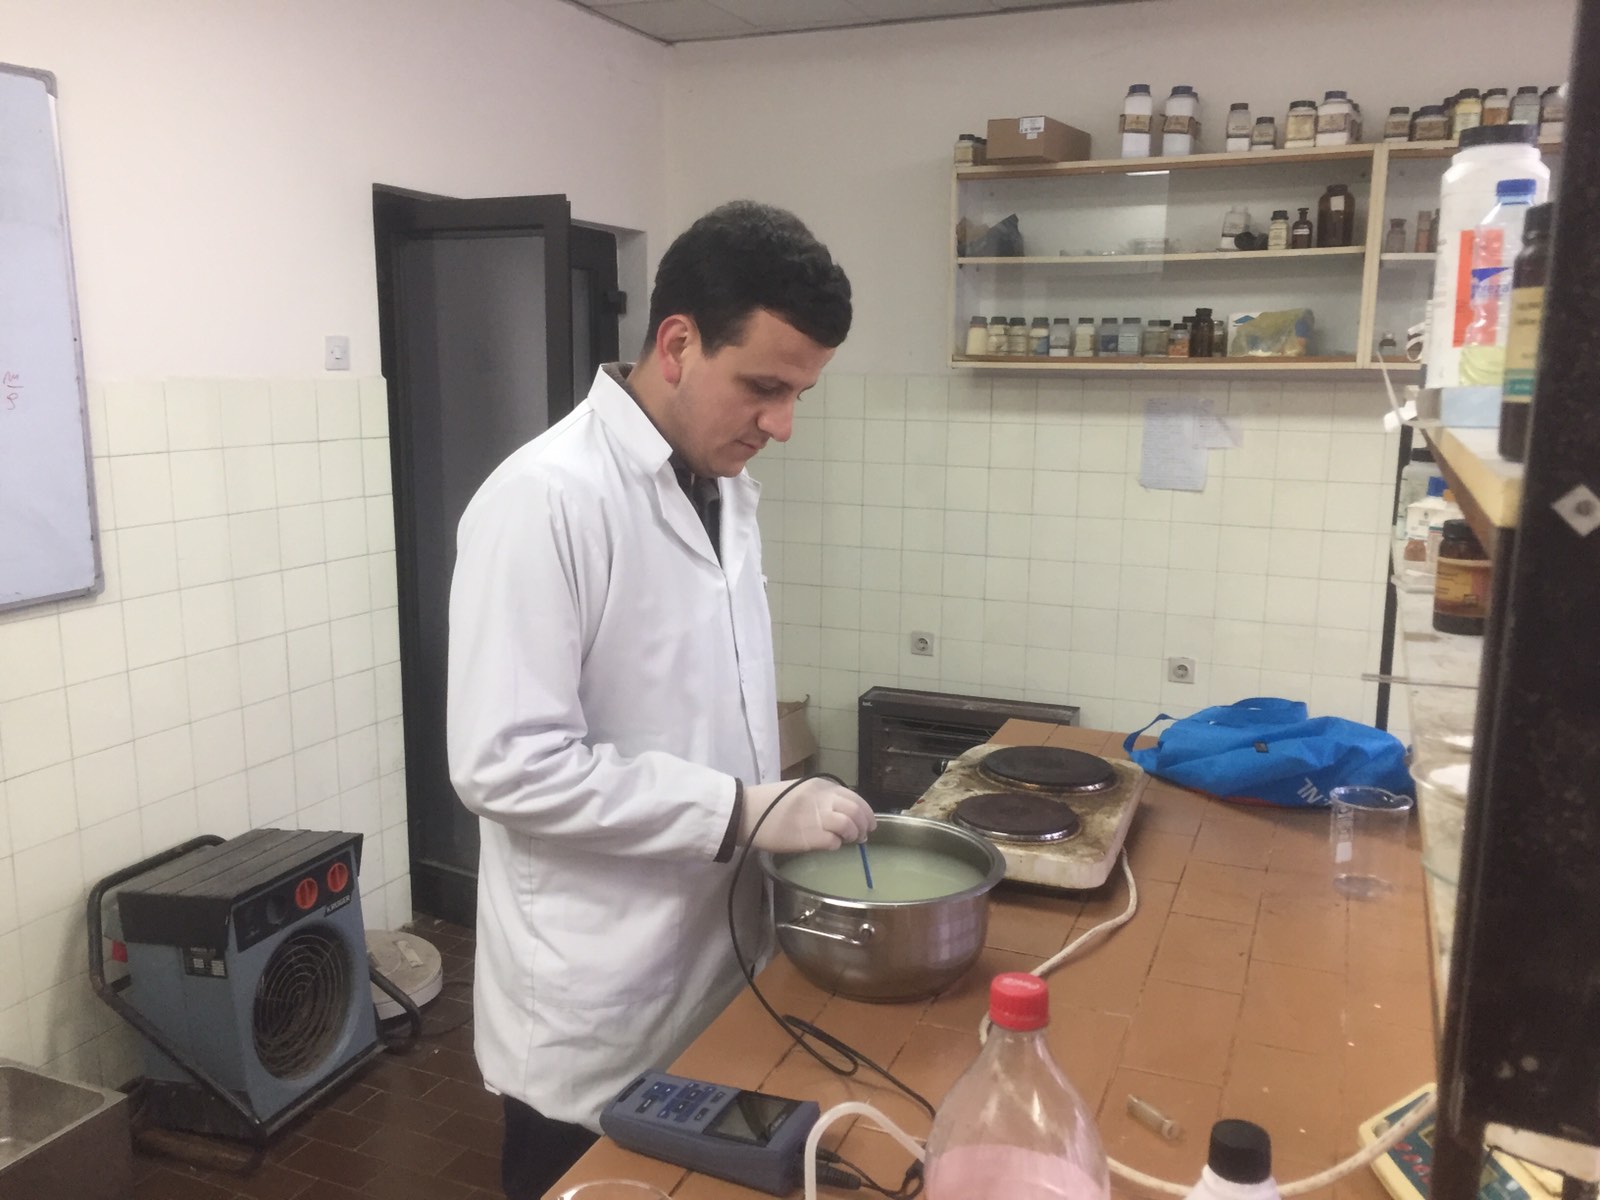 Mitrovica Student Produces Cheese From Whey